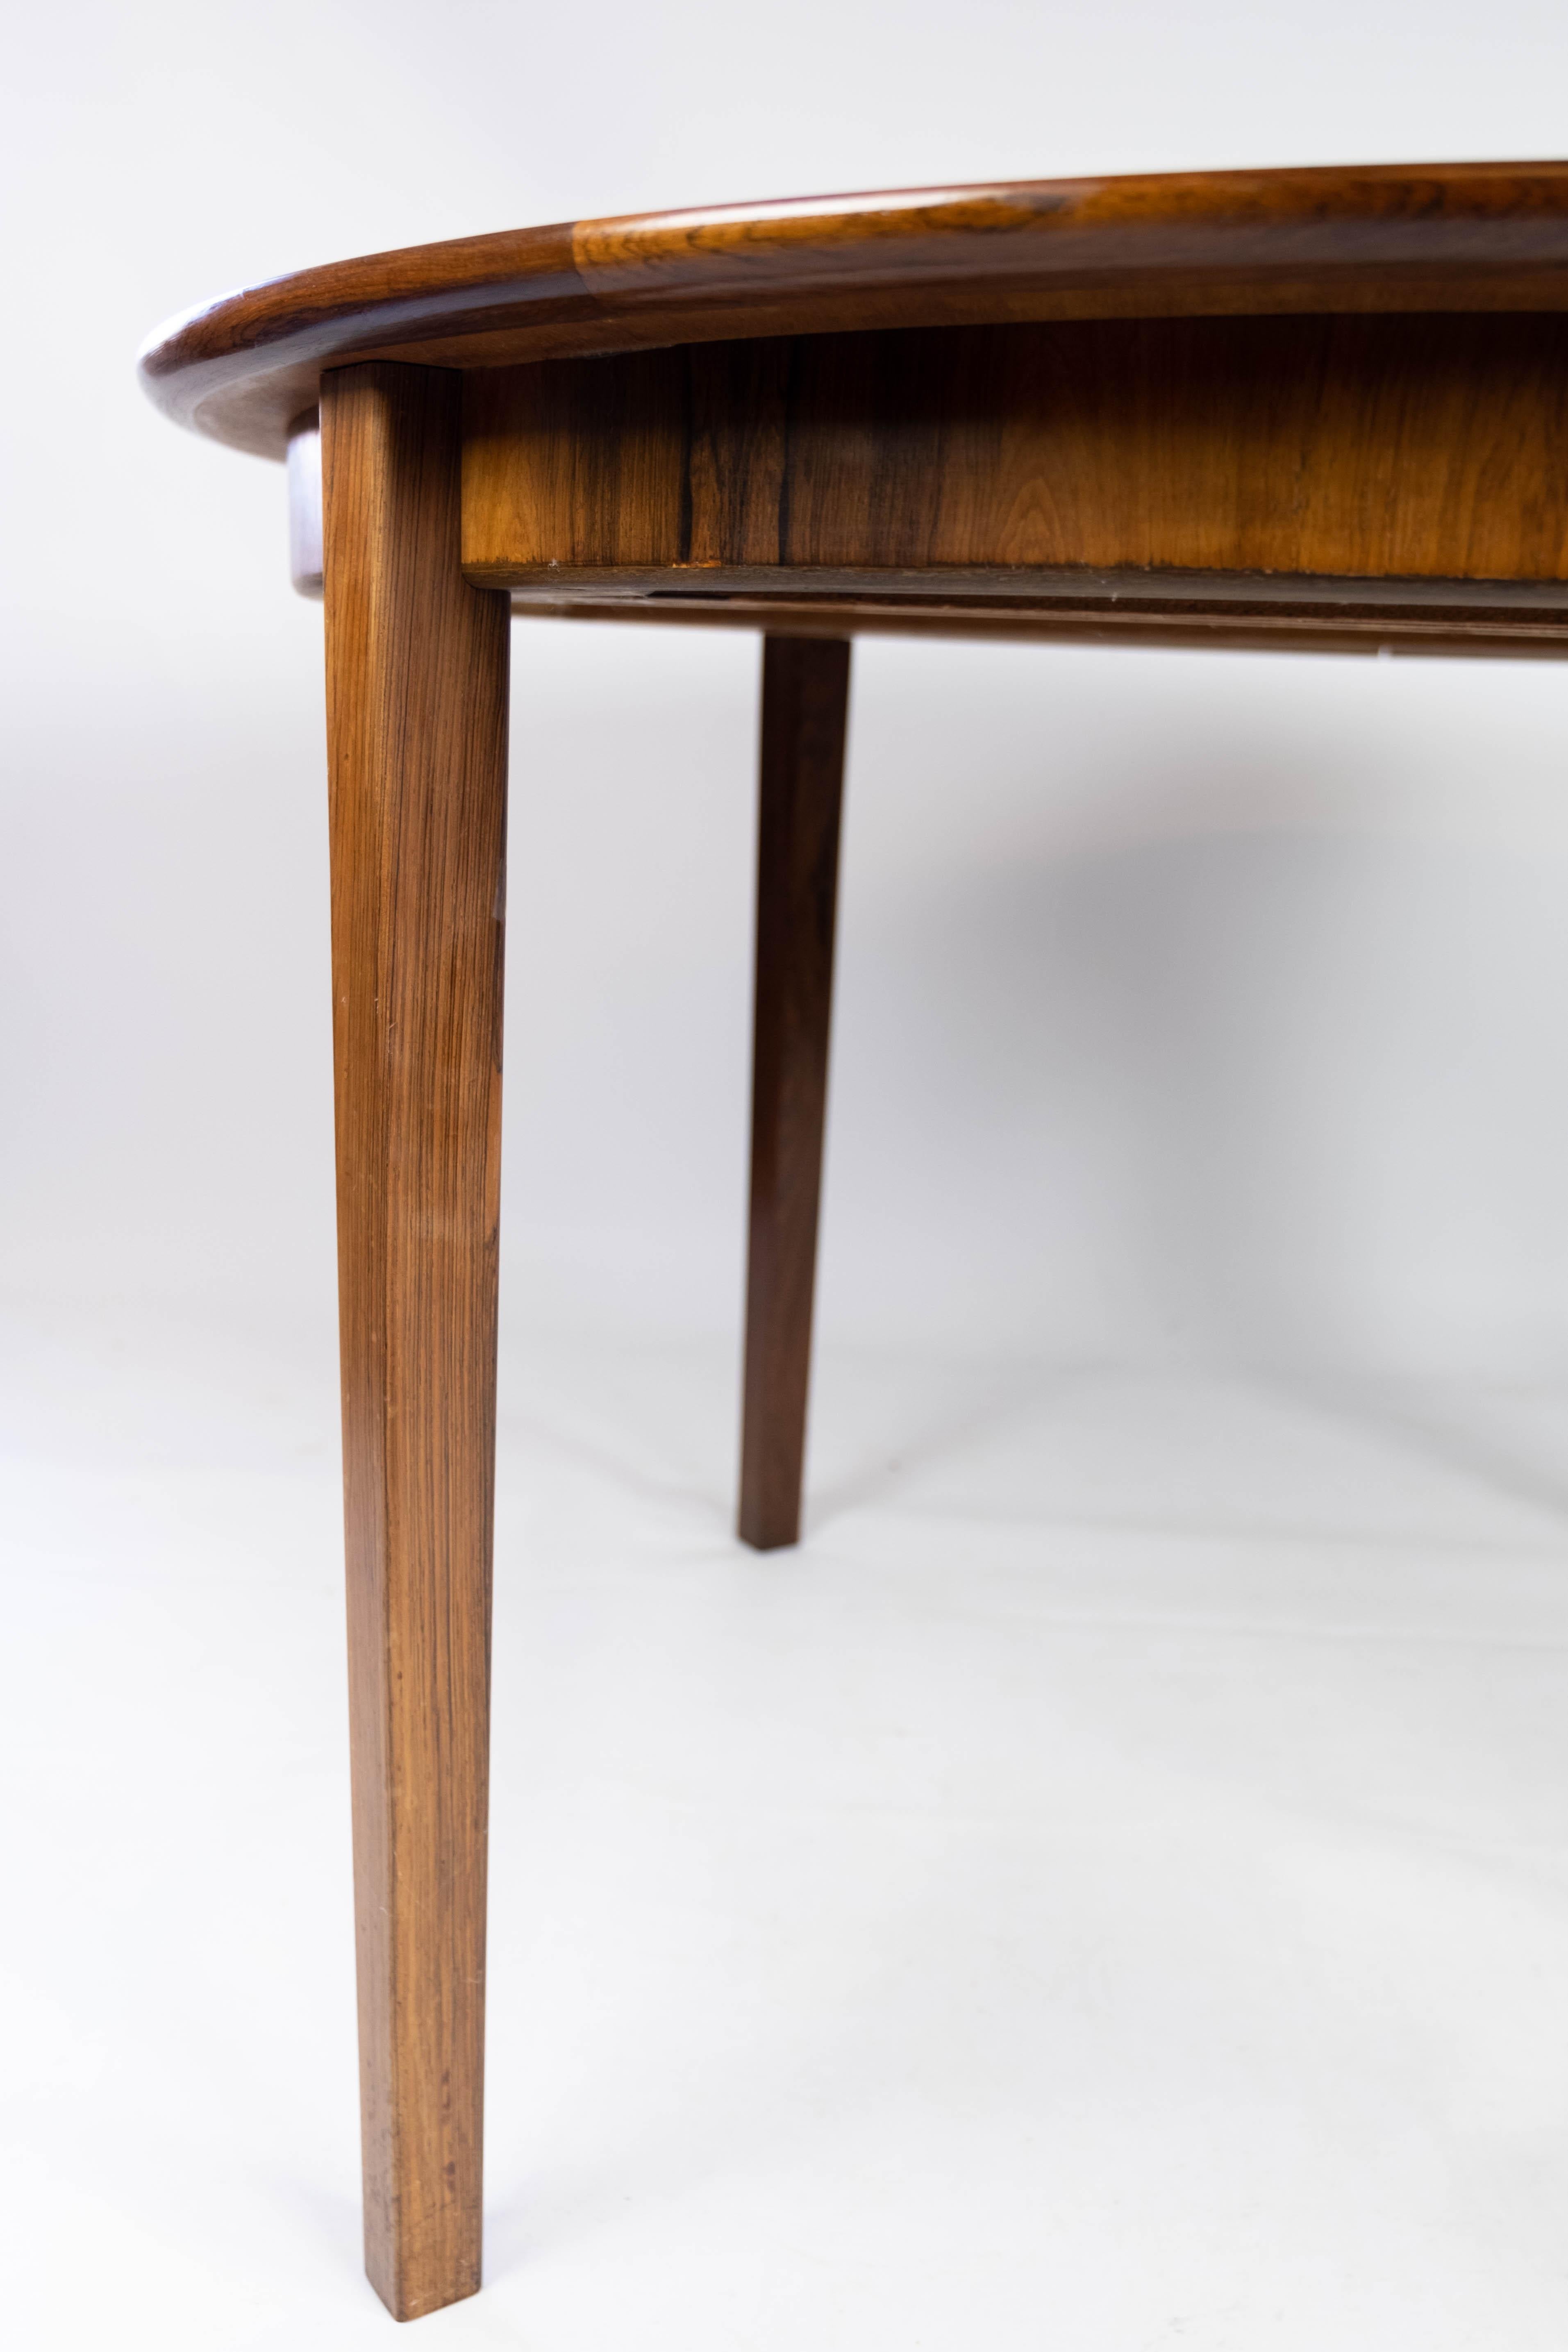 Mid-20th Century Dining Table Made In Rosewood With Extension Plates, Danish Design From 1960s For Sale